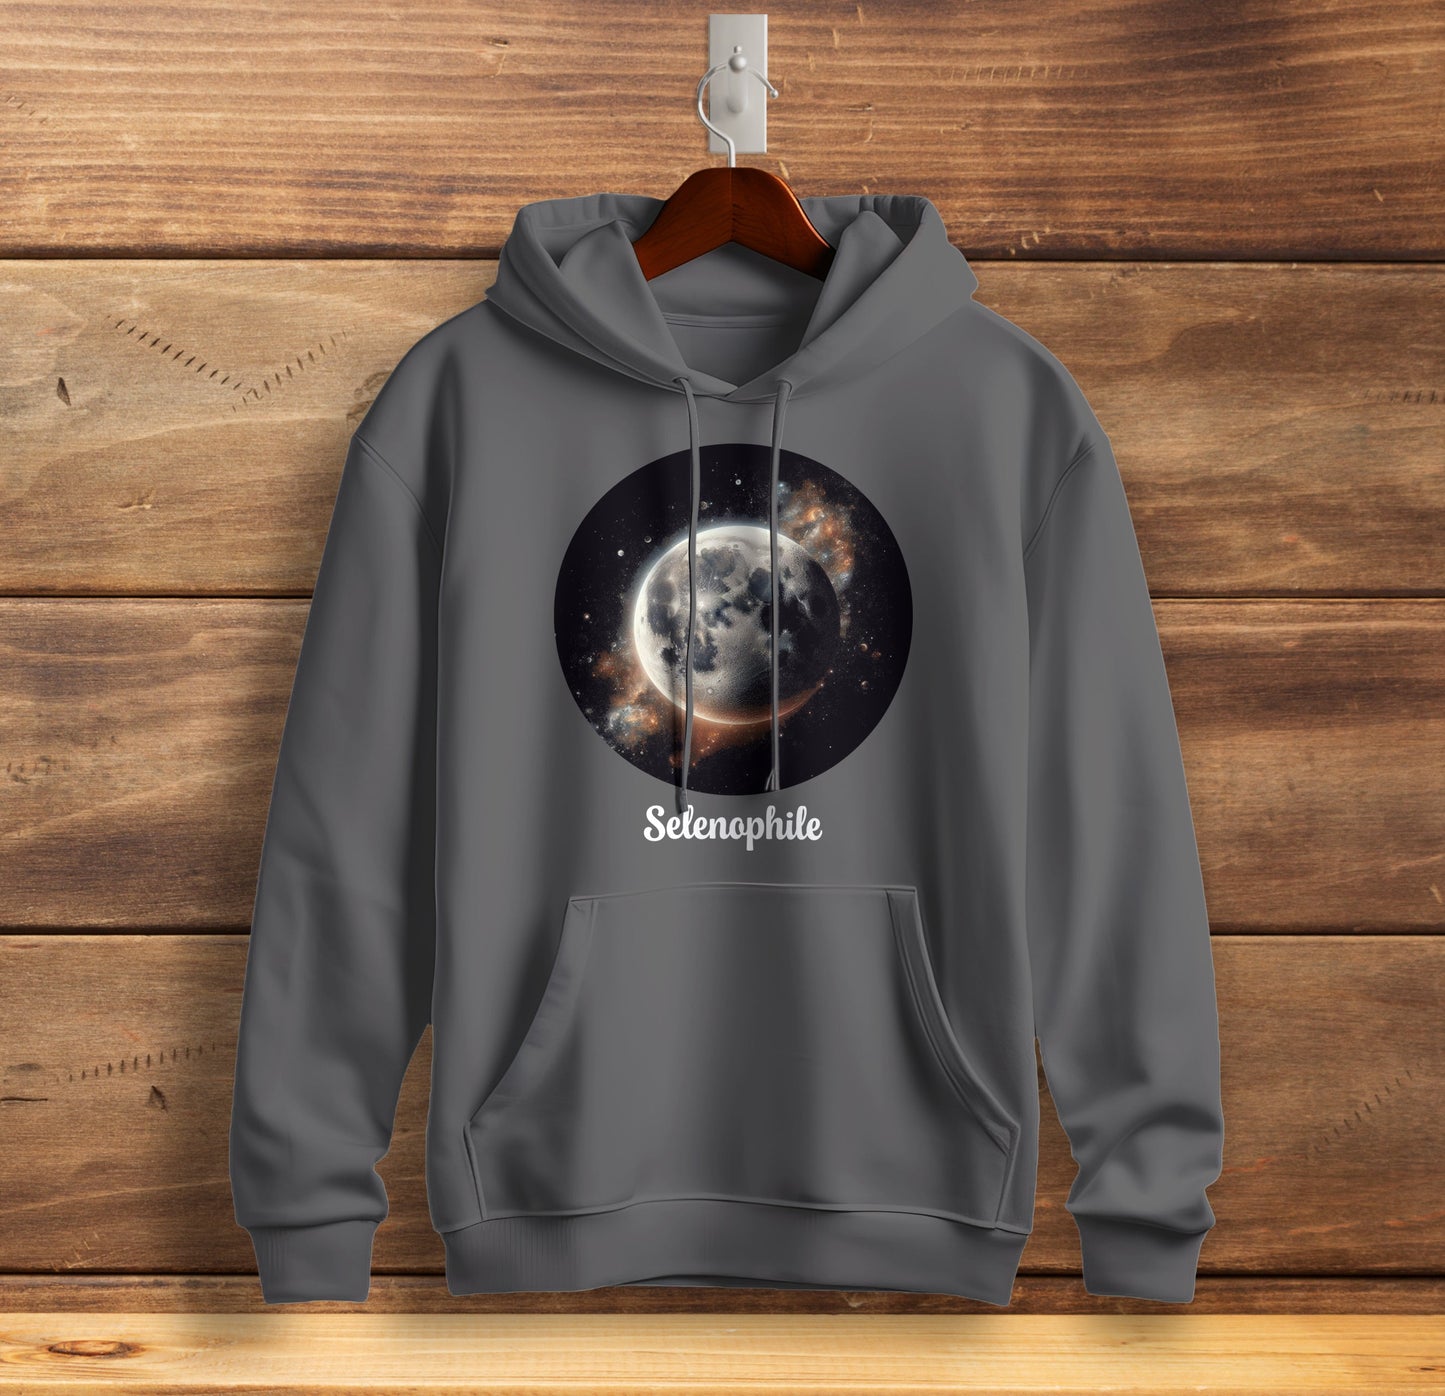 Selenophile - Full Moon Graphic Printed Hooded Sweat Shirt for Men - Cotton - Cosmos Sweat Shirt 🪐 ☀️ ☯️ 🌘🌑🌒